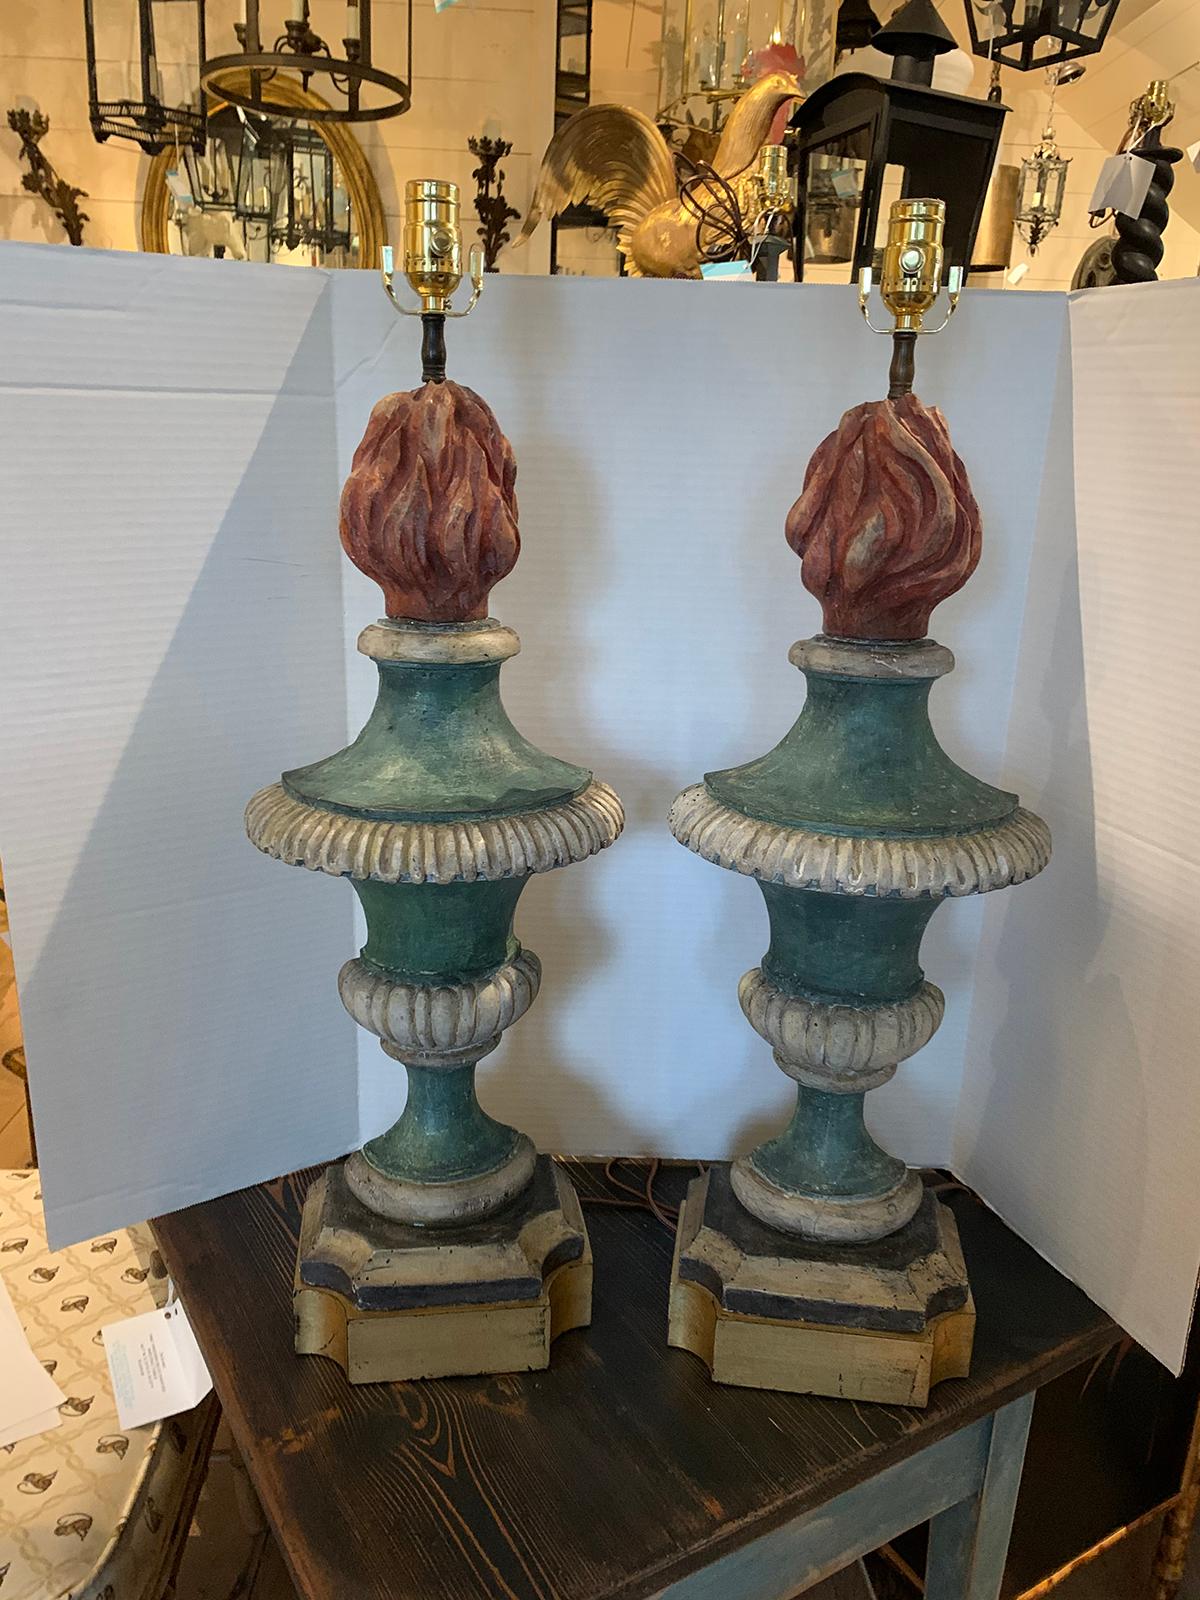 Pair of 18th-19th century Italian hand carved wood polychrome urns as lamps with custom bases.
New wiring.